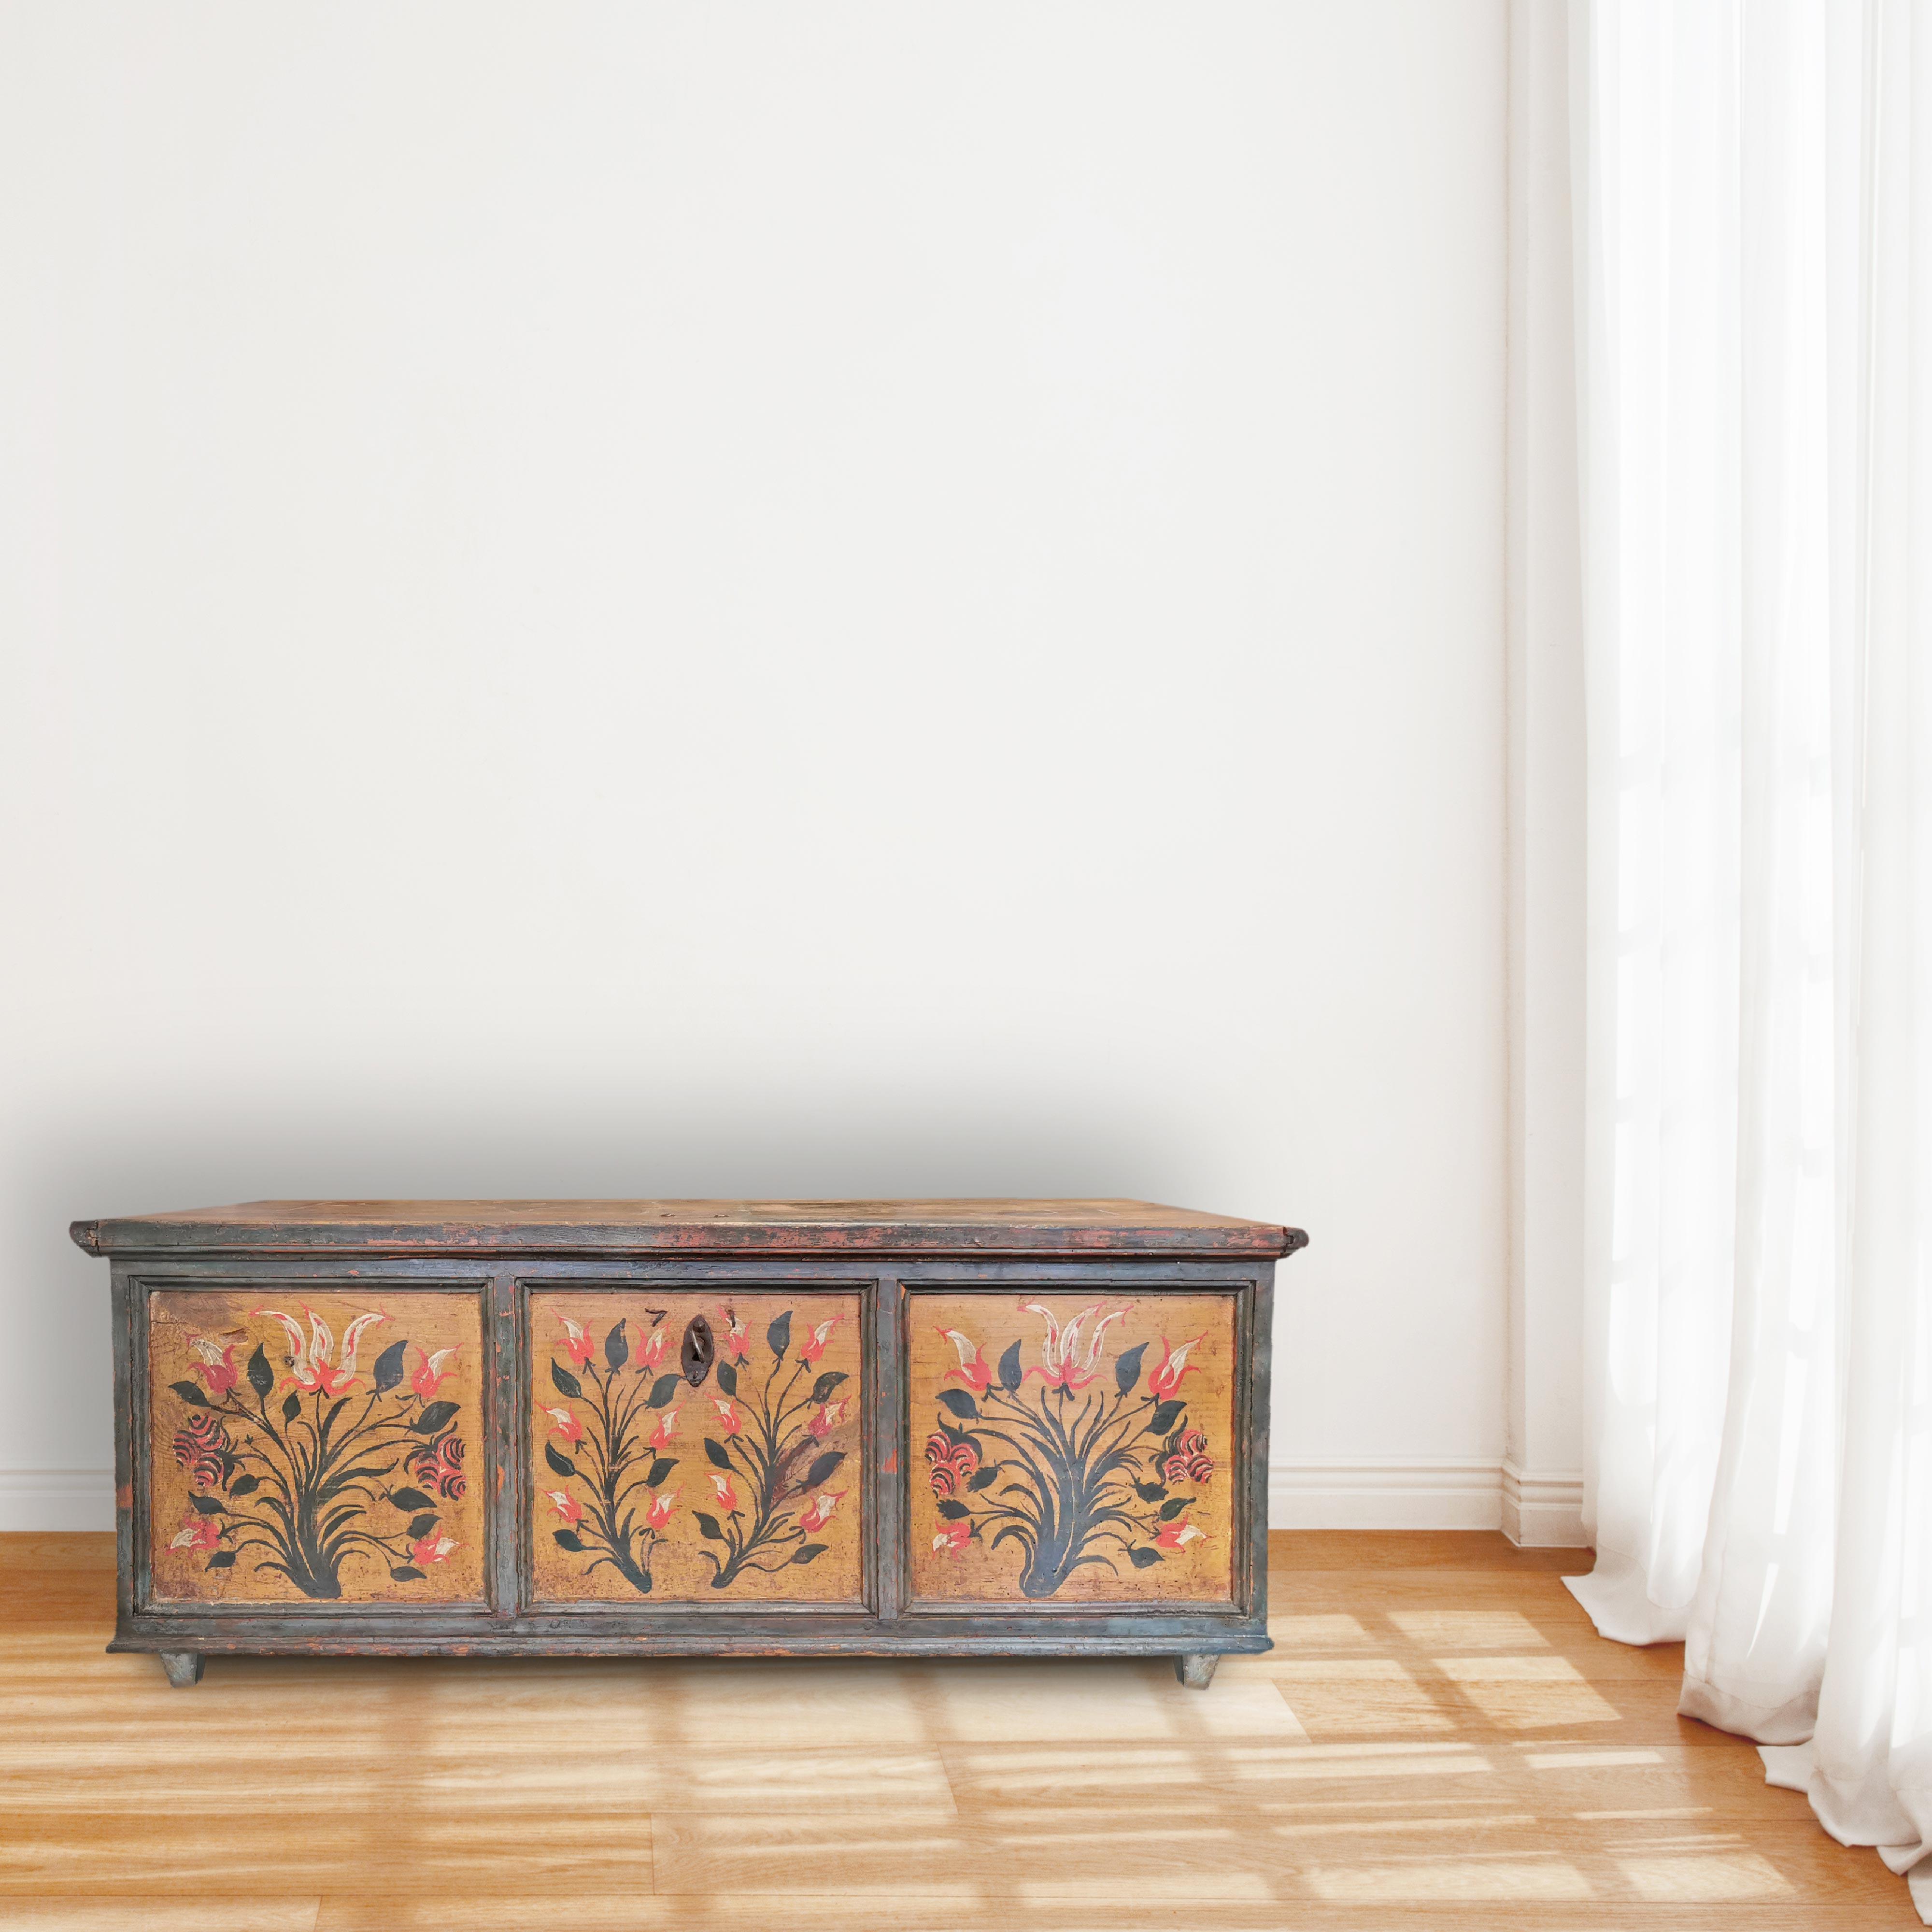 Floral Green Painted Blanket Chest
H.48 cm – W.118 cm – D.57 cm
Painted Tyrolean chest, dark green/teal blue.
On the front, three large framed backgrounds enclose floral decorations on a natural wood background.
On the sides there are geometric